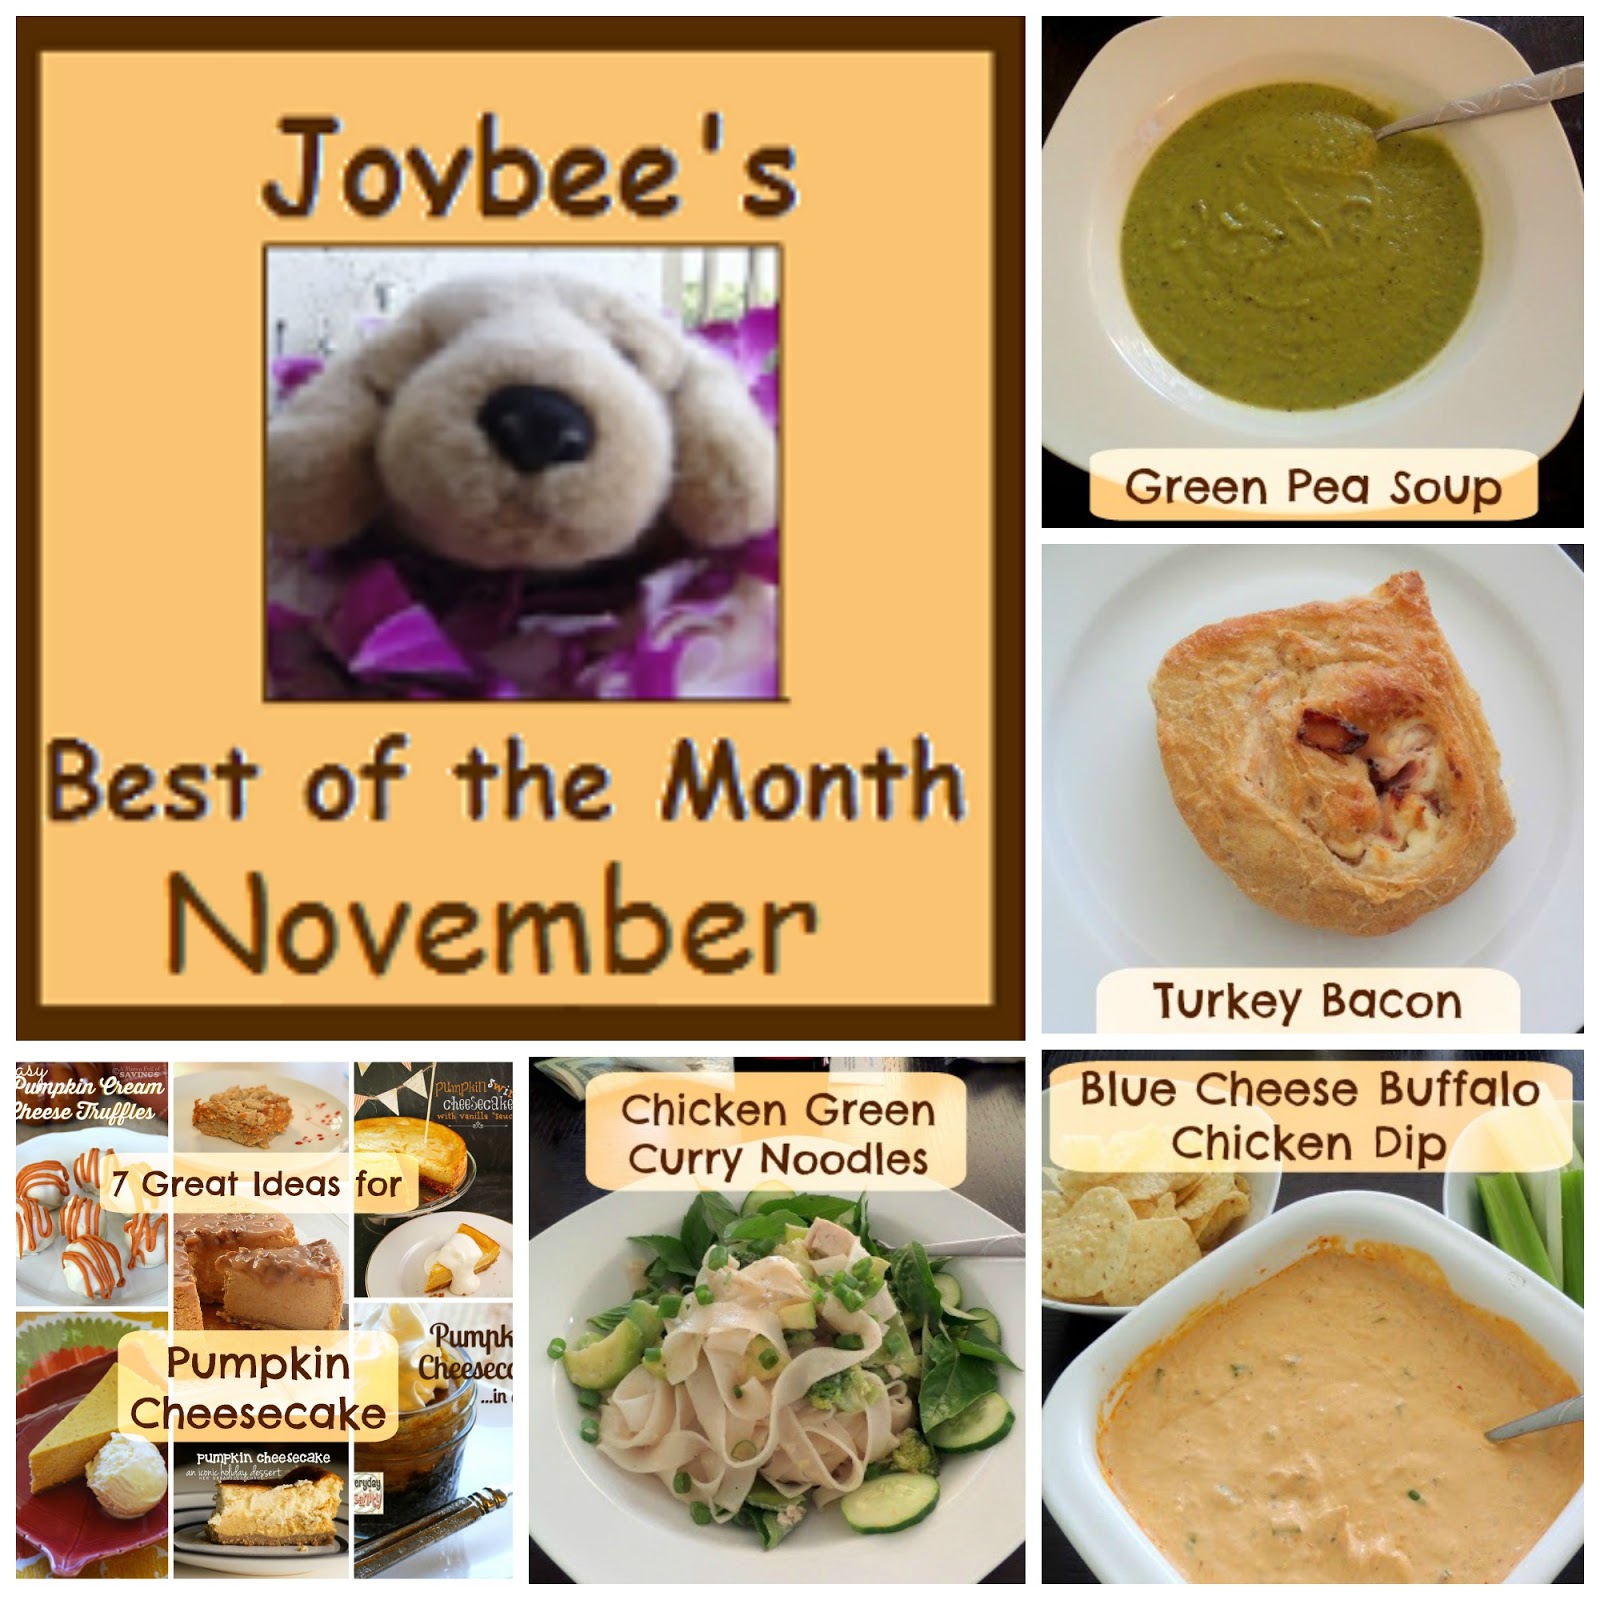 Best of the Month November 2014:  A recap of my most popular posts from November 2014.